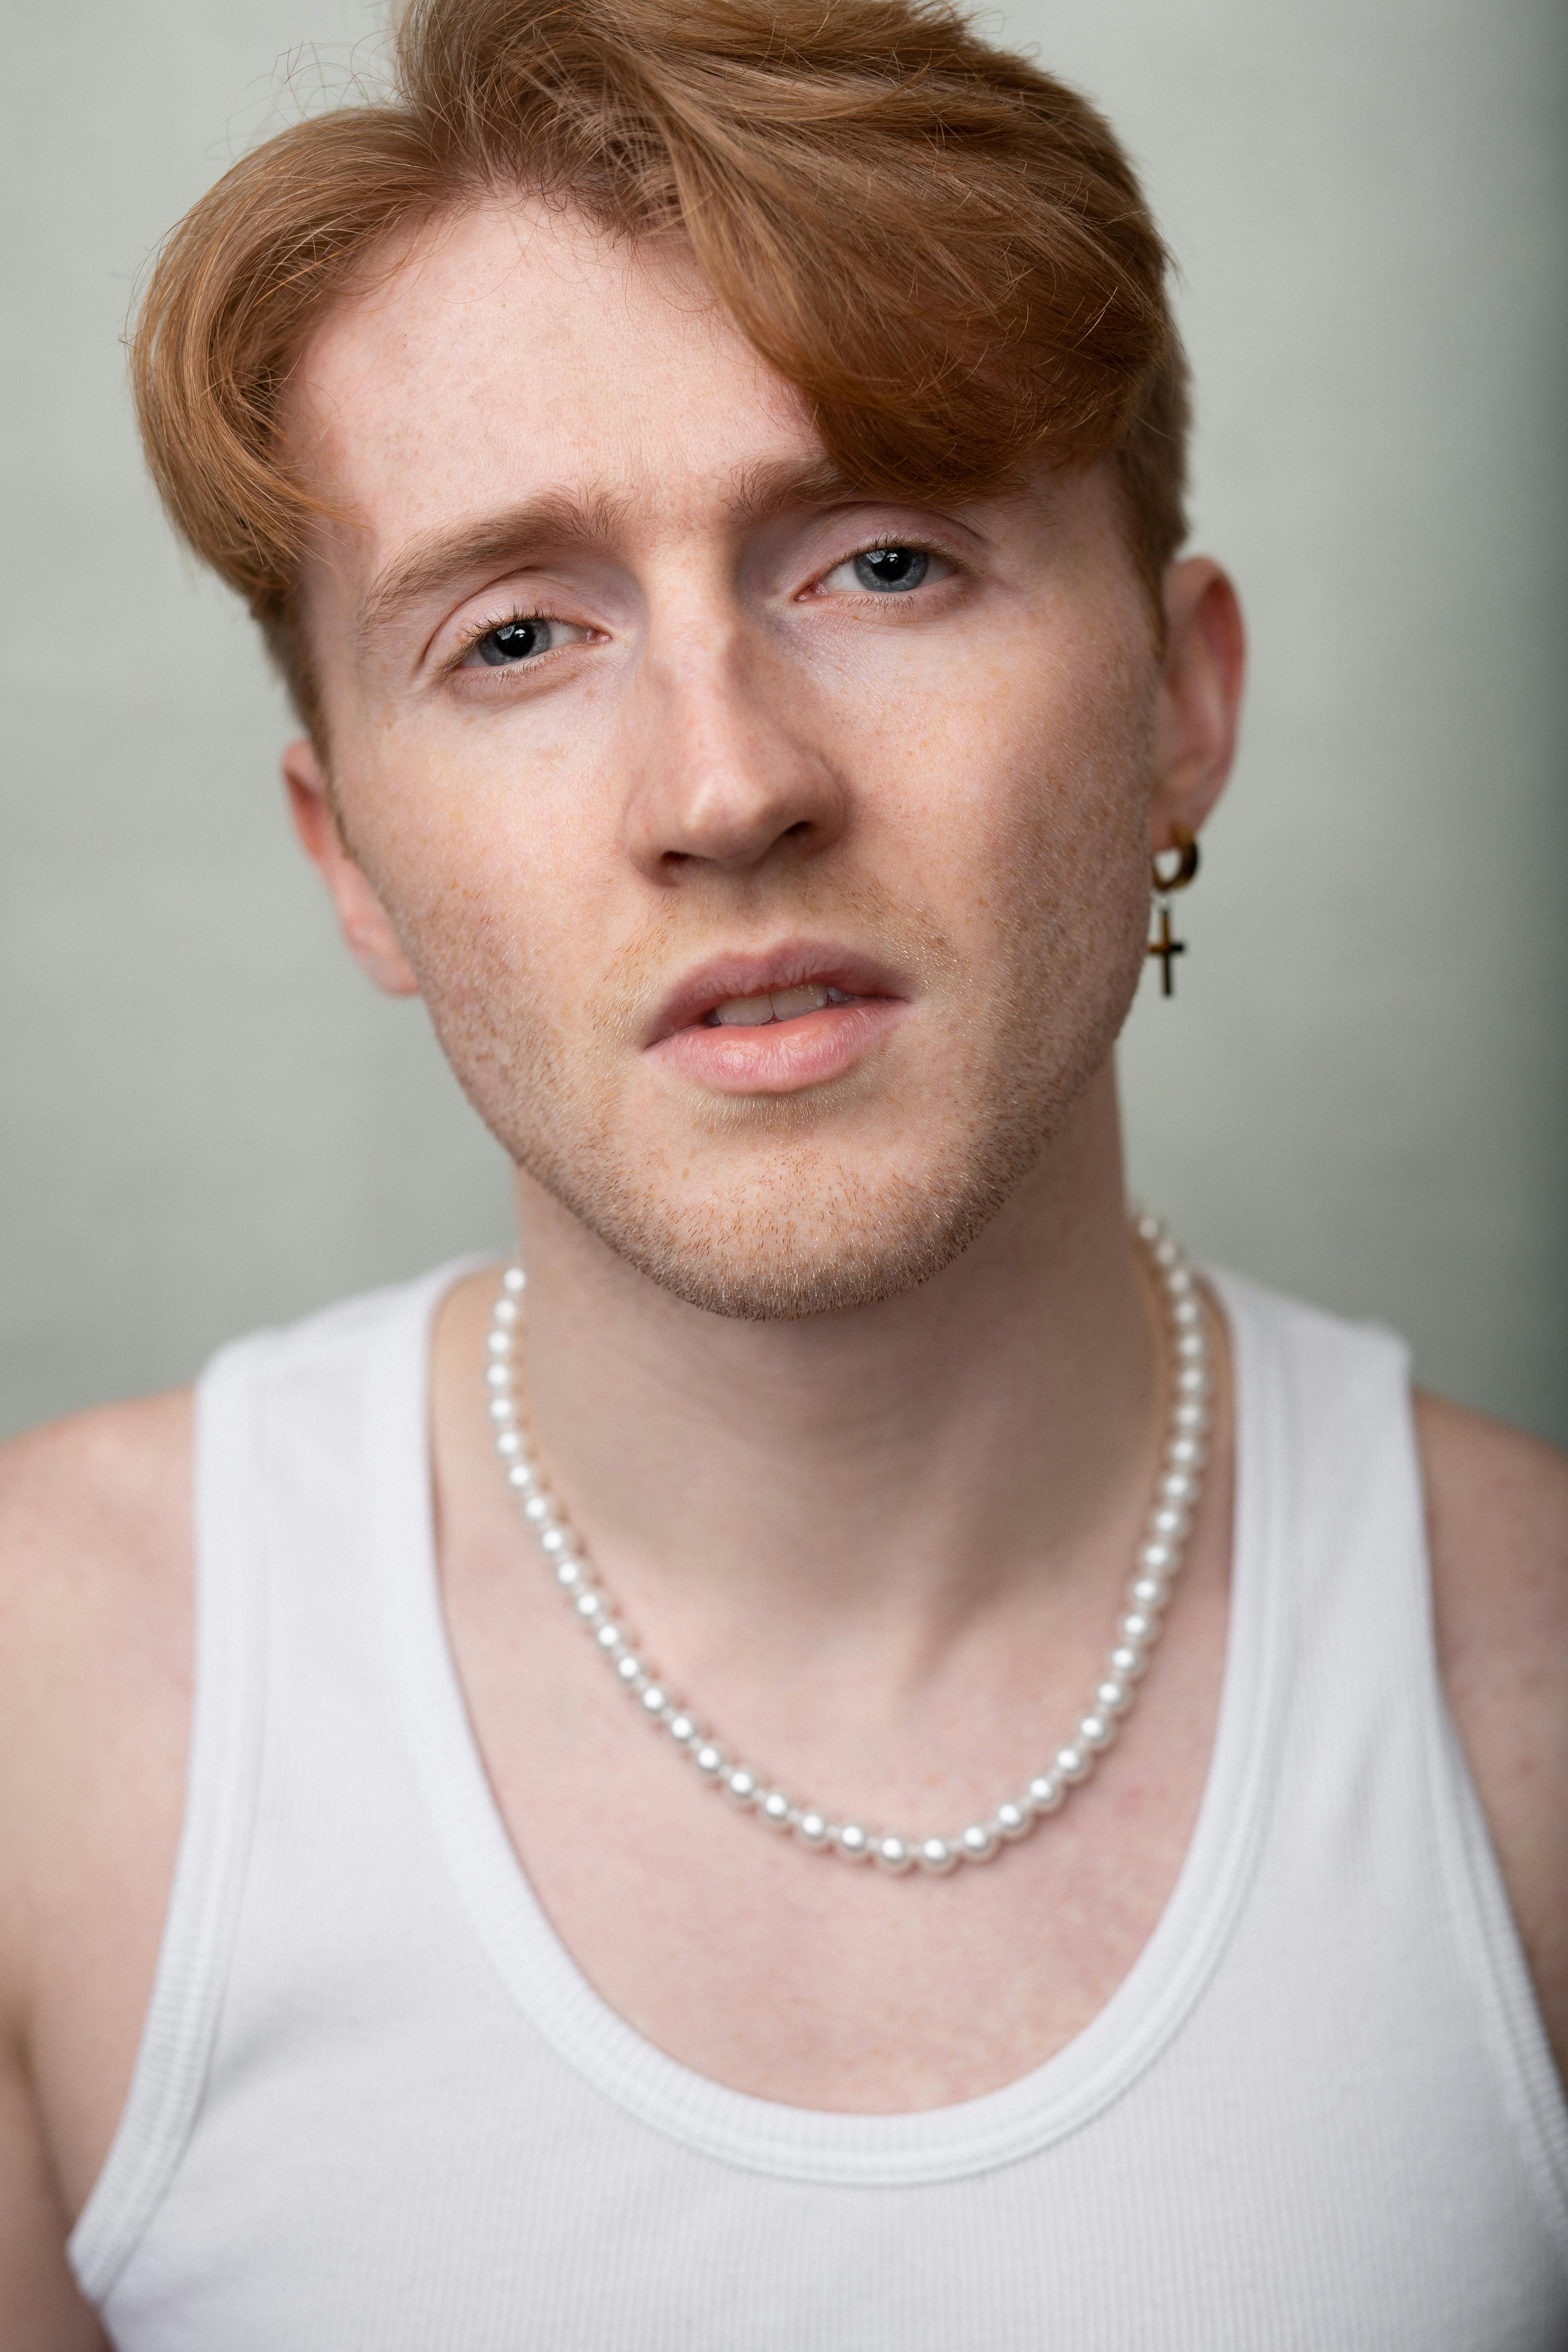 Headshot of a London actor